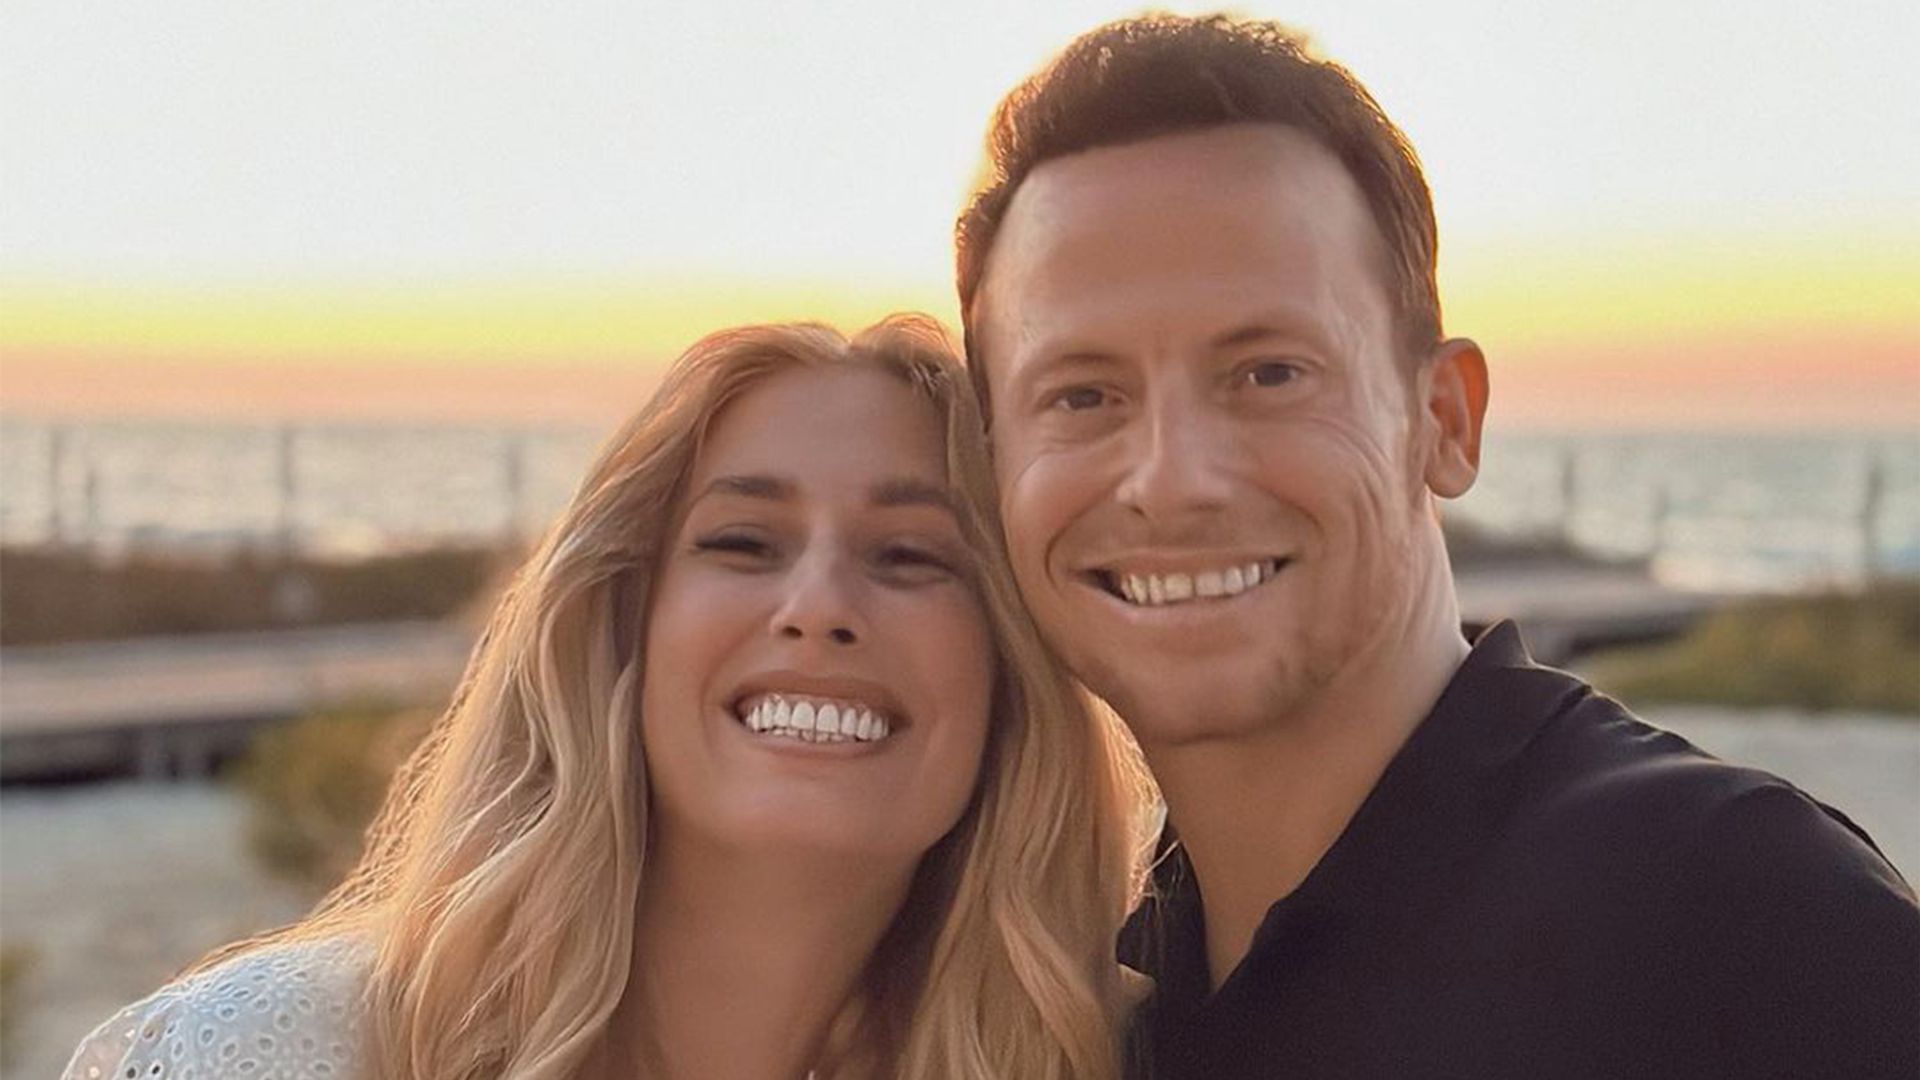 Stacey Solomon and Joe Swash cuddle together for sweet sunset picture